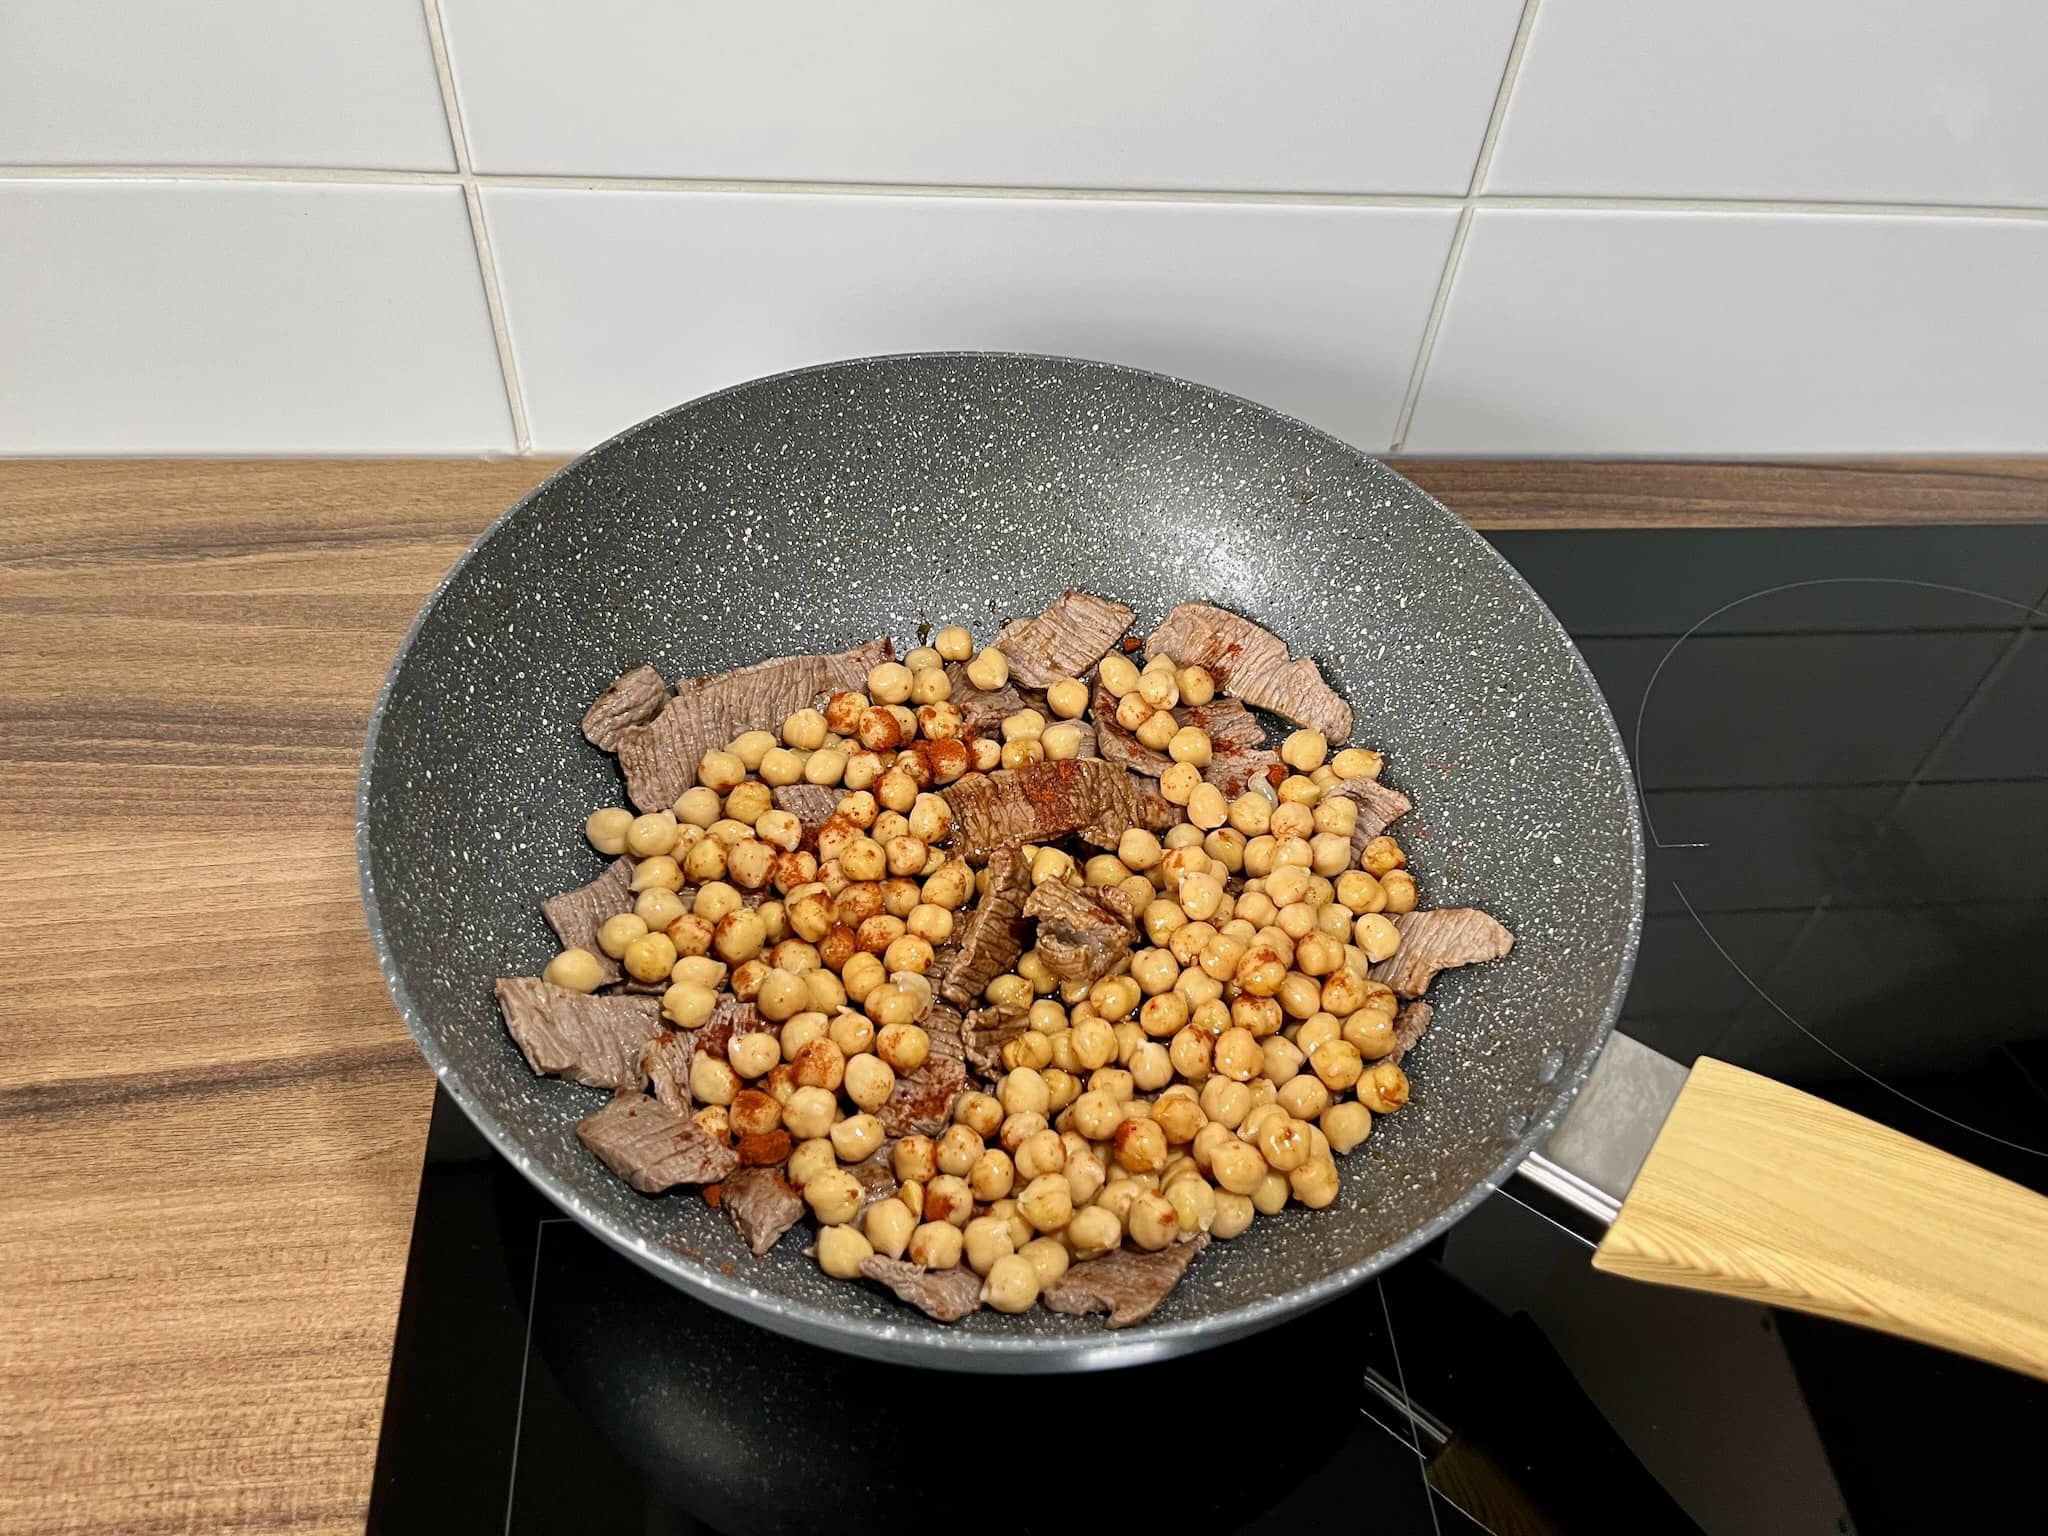 A large skillet filled with cooked steak meat slices, chickpeas, and spices